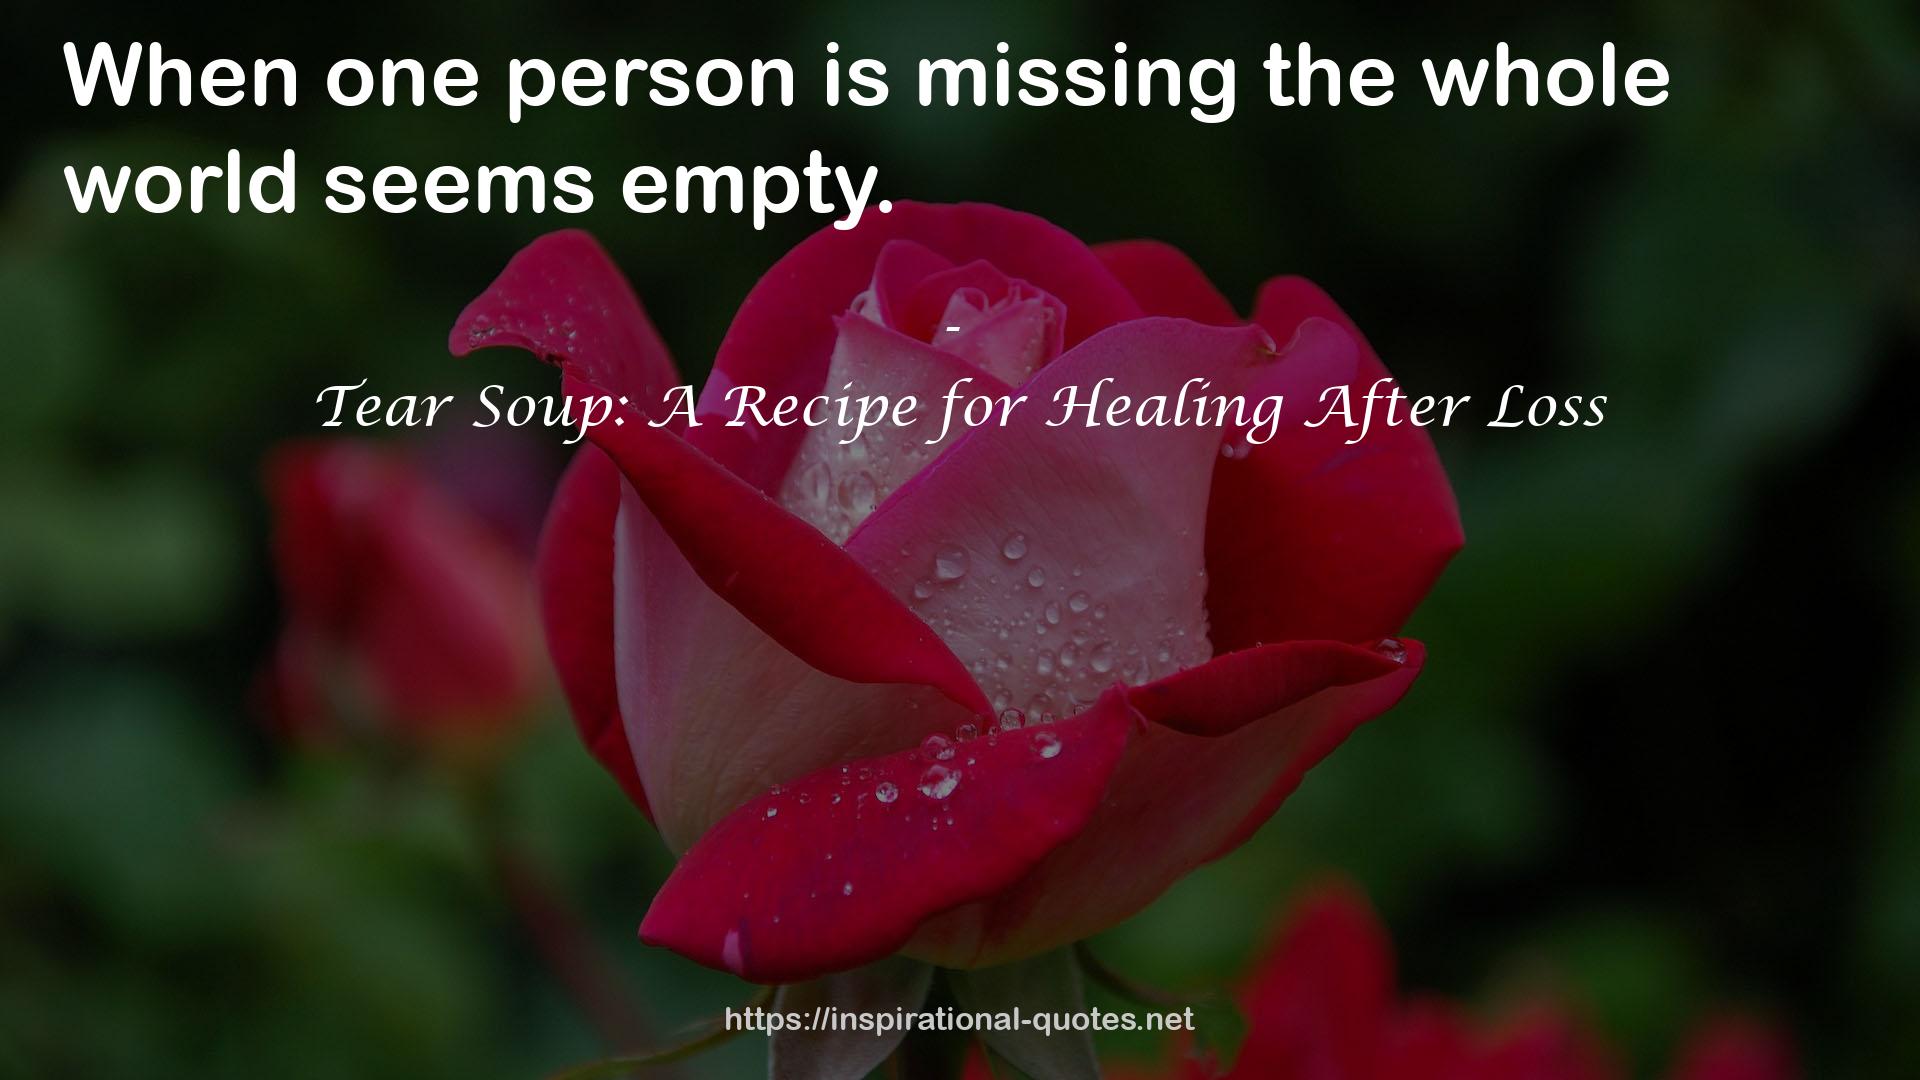 Tear Soup: A Recipe for Healing After Loss QUOTES